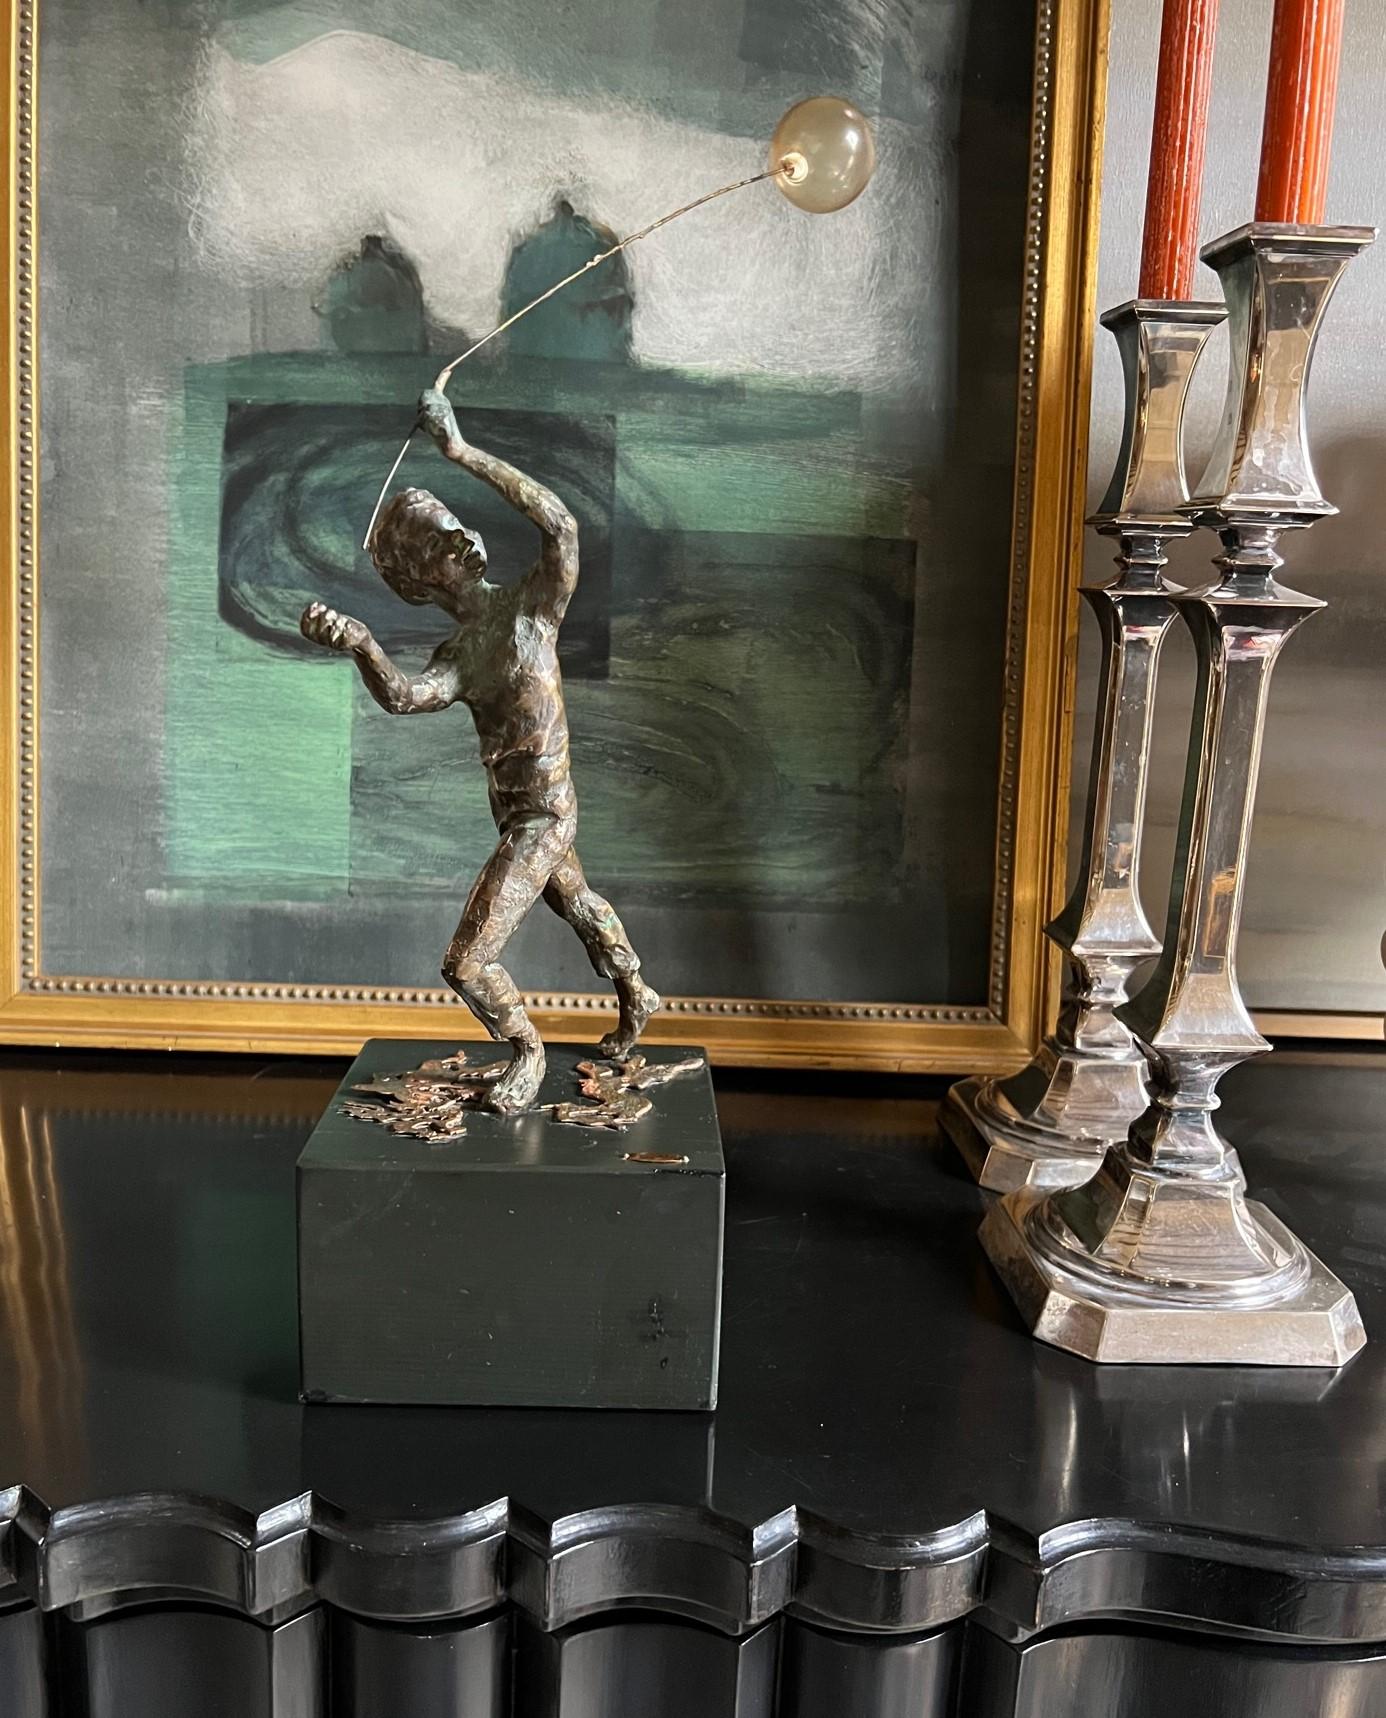 Bronze sculpture of boy playing with a blown glass balloon by Curtis Jere.

The bronze boy measures 13.5 inches tall, from the base to the top of the balloon is 16.5 inches tall.